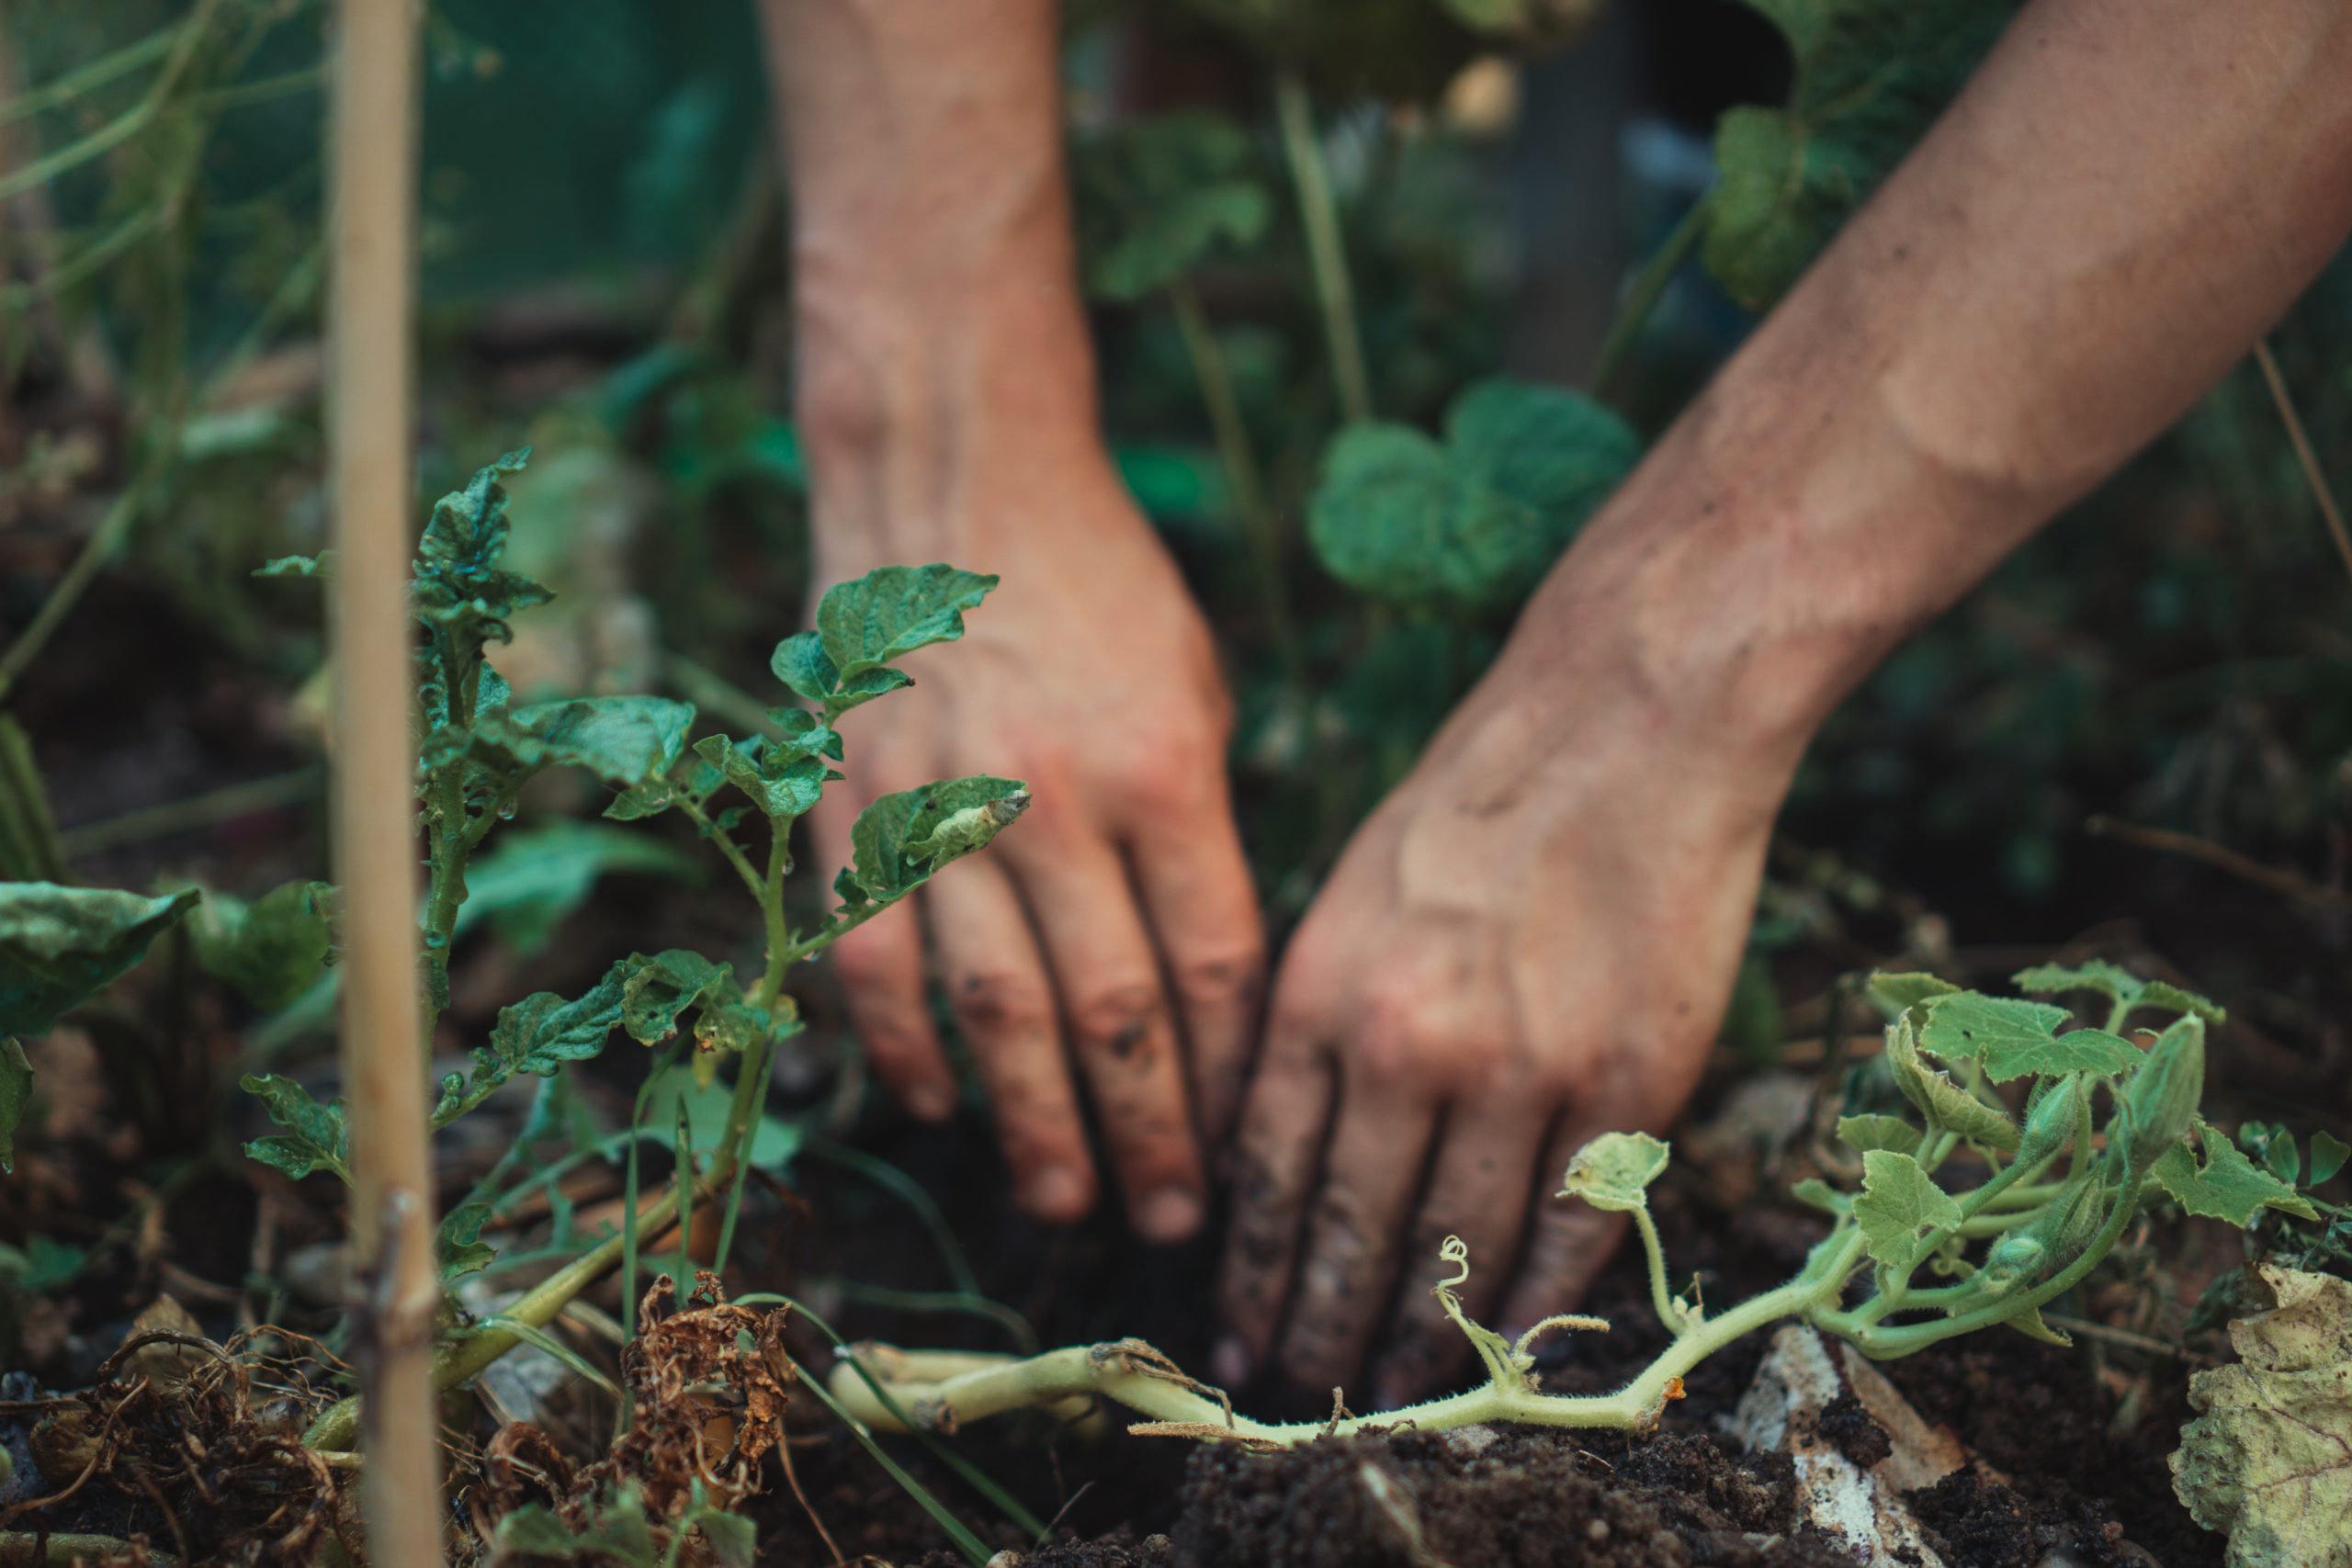 Pair of hands digging into the dirt, surrounded by some green sprouting plants